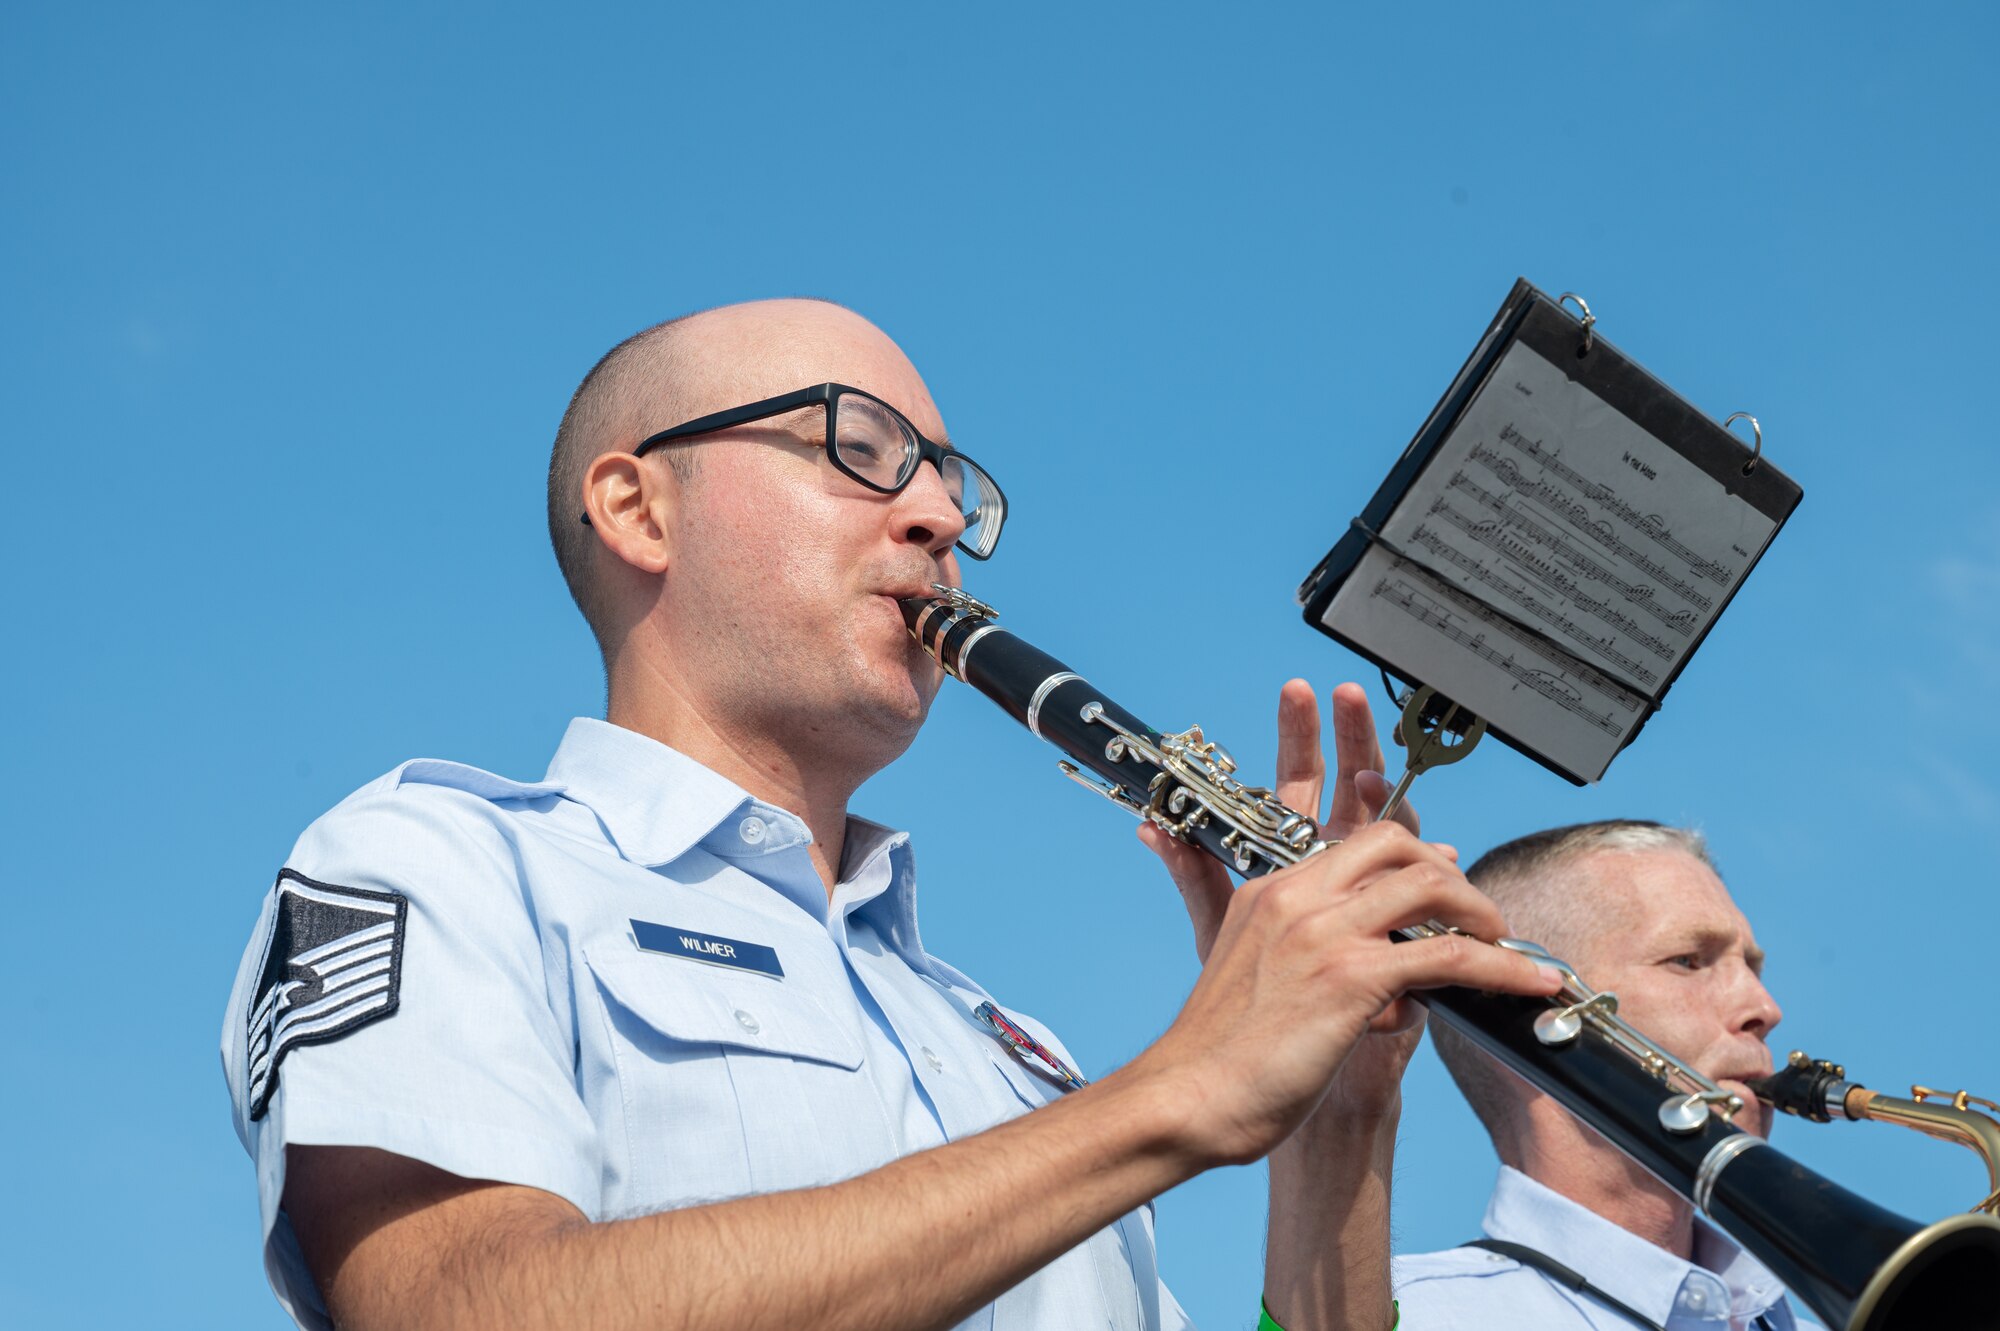 U.S. Air Force Master Sgt. Brian Wilmer, U.S. Air Forces in Europe Ceremonial Band clarinetist, performs at the NATO Days event at Leoš Janáček Airport in Ostrava, Czech Republic, Sept. 17, 2023.